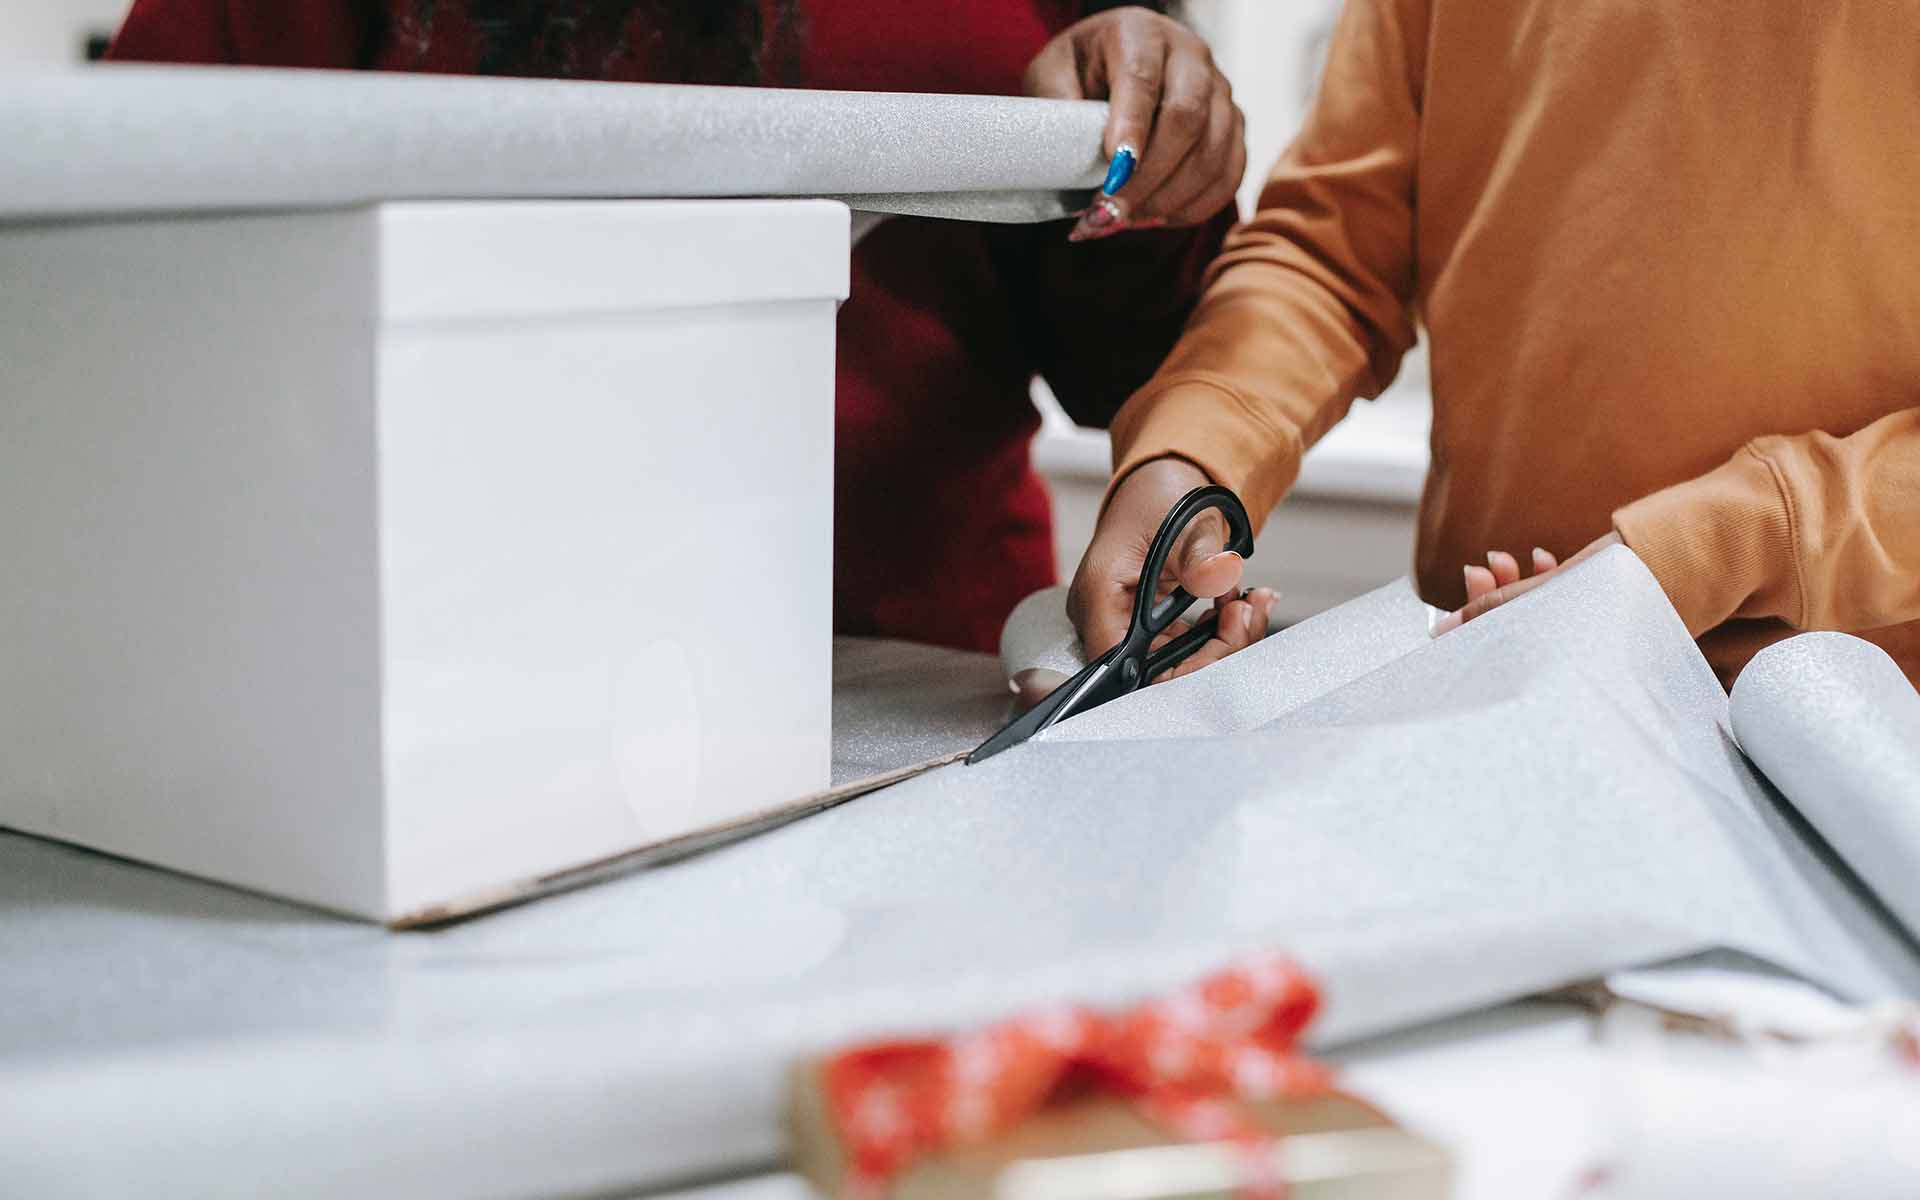 Two people wrapping presents planning an inclusive Christmas